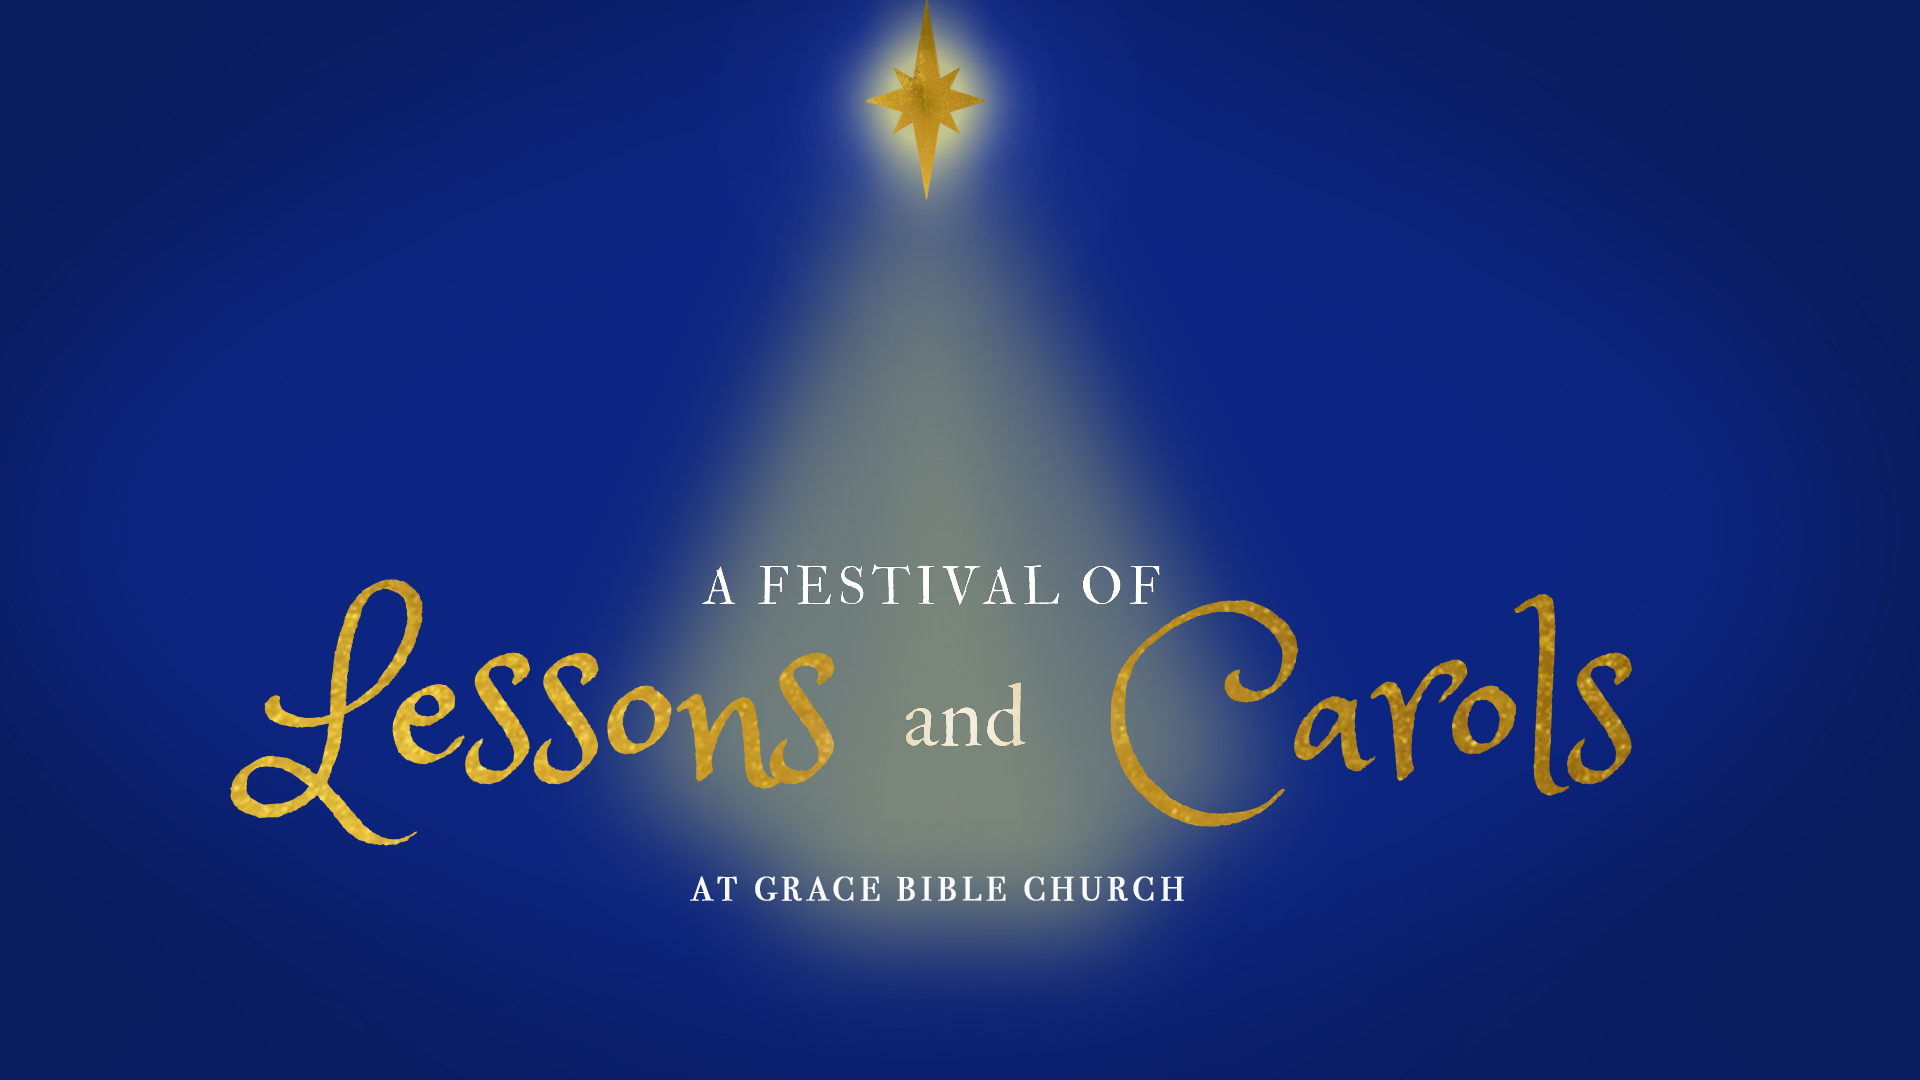 A Festival of Lessons and Carols Grace Bible Church